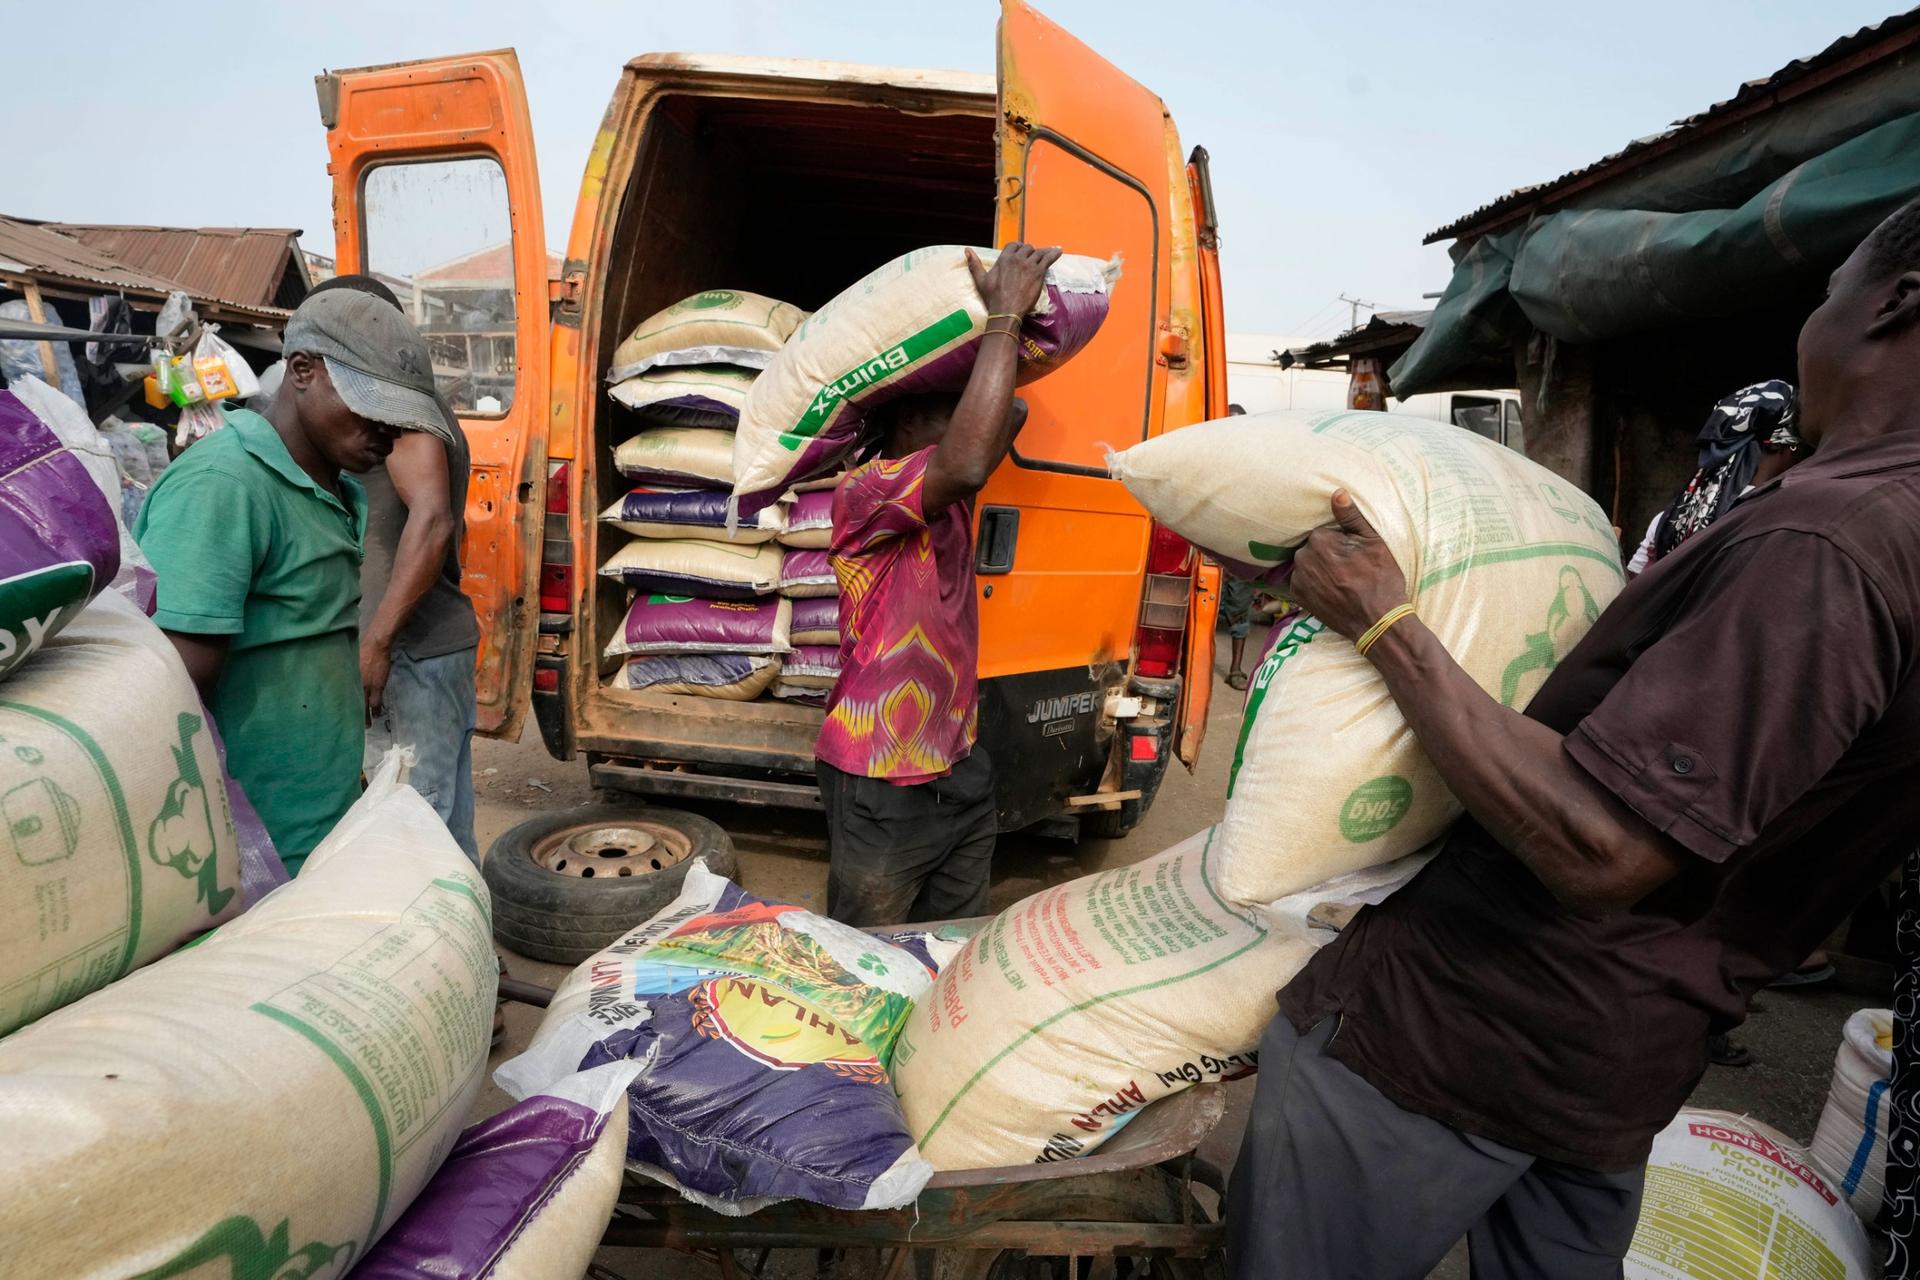 Workers loads bags of rice into a truck at a market in Lagos, Nigeria Tuesday, Feb. 7, 2023. 